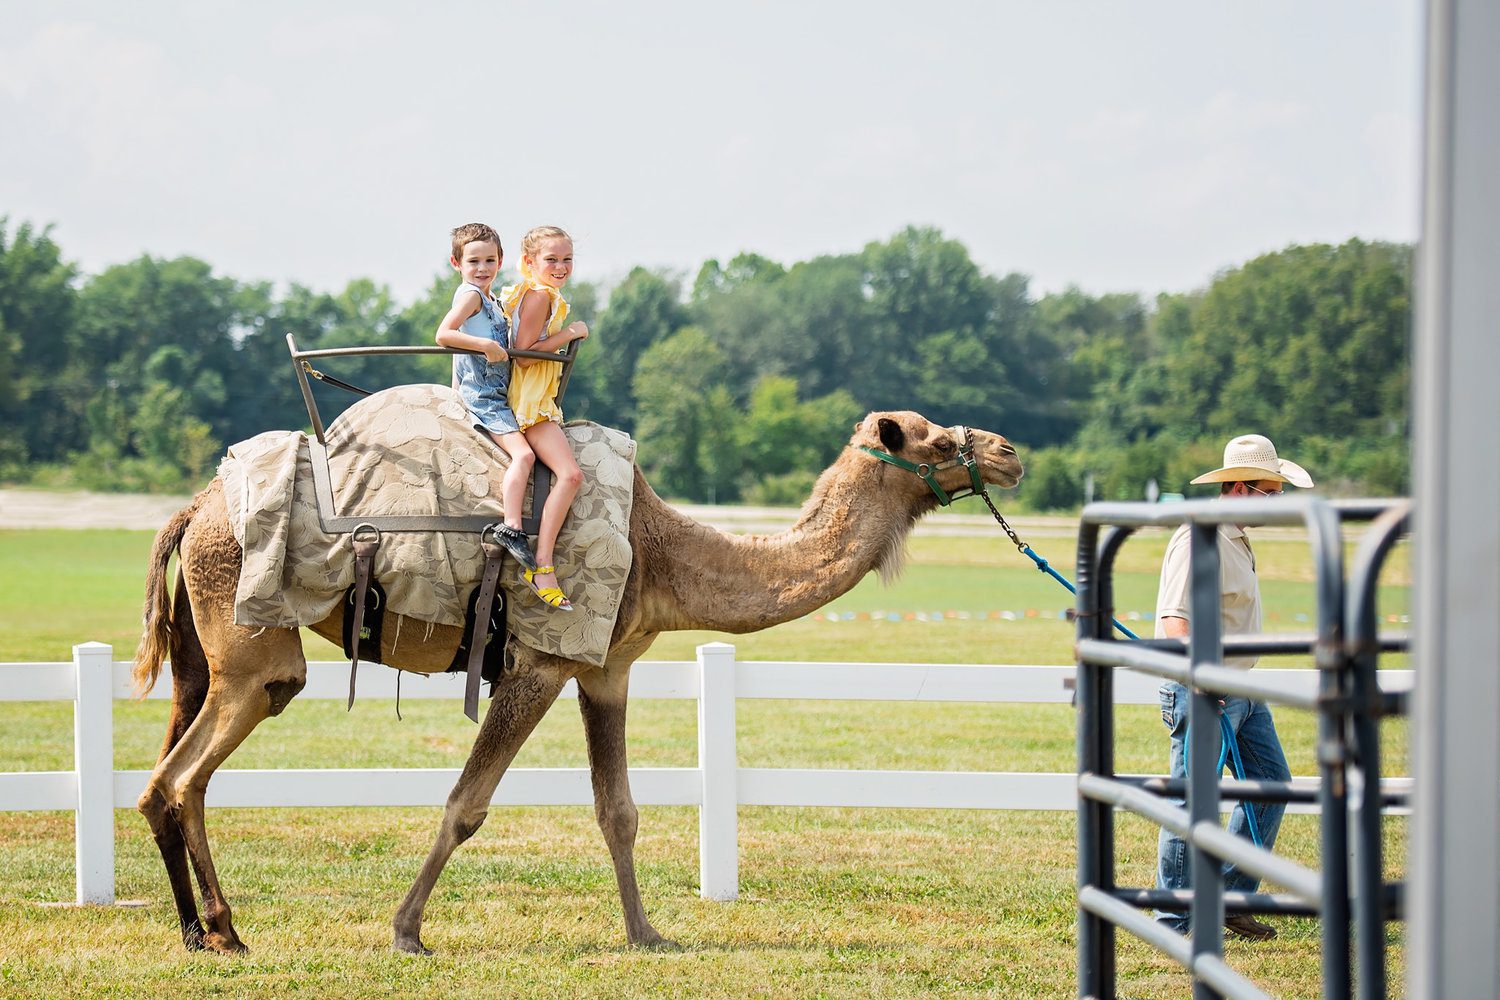 A picture of two children riding on a camel